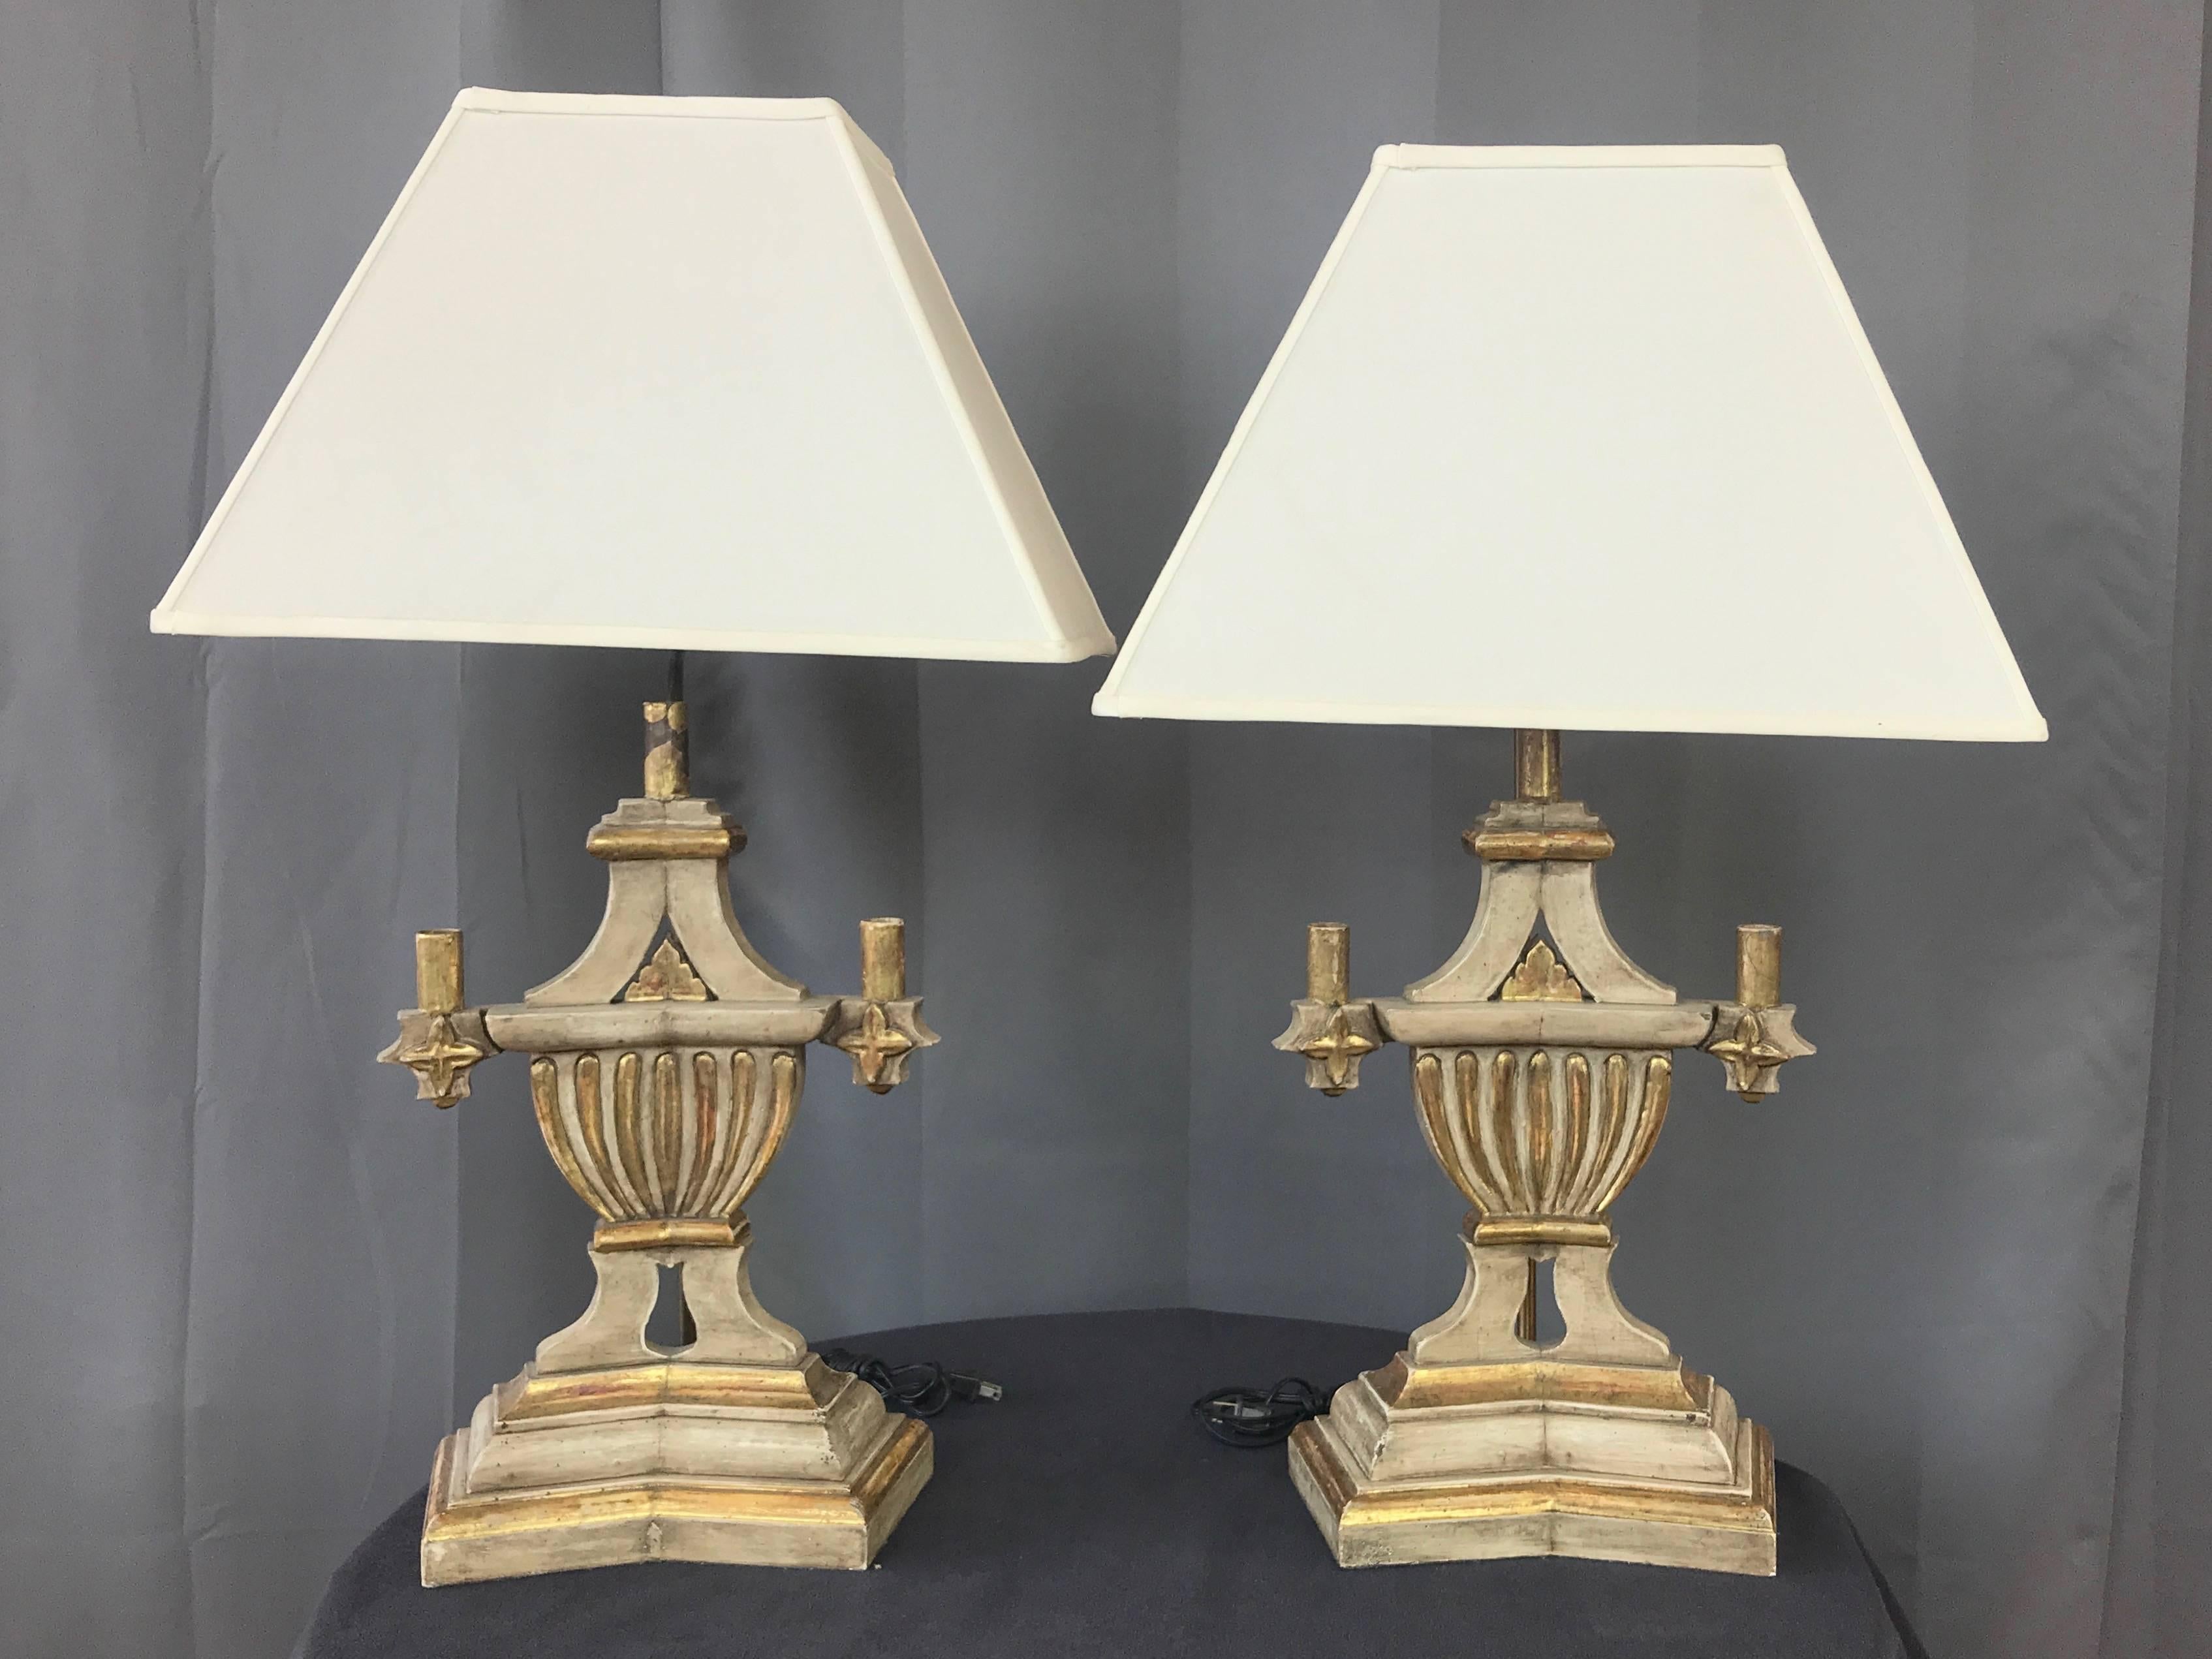 A pair of 1930s Italian neoclassical-style parcel-gilt plaster and wood candleholder table lamps.

Stately architectural form of stylized urn body with a trio of candleholders on a stepped and angled base. Plaster over hand-carved wood, with a